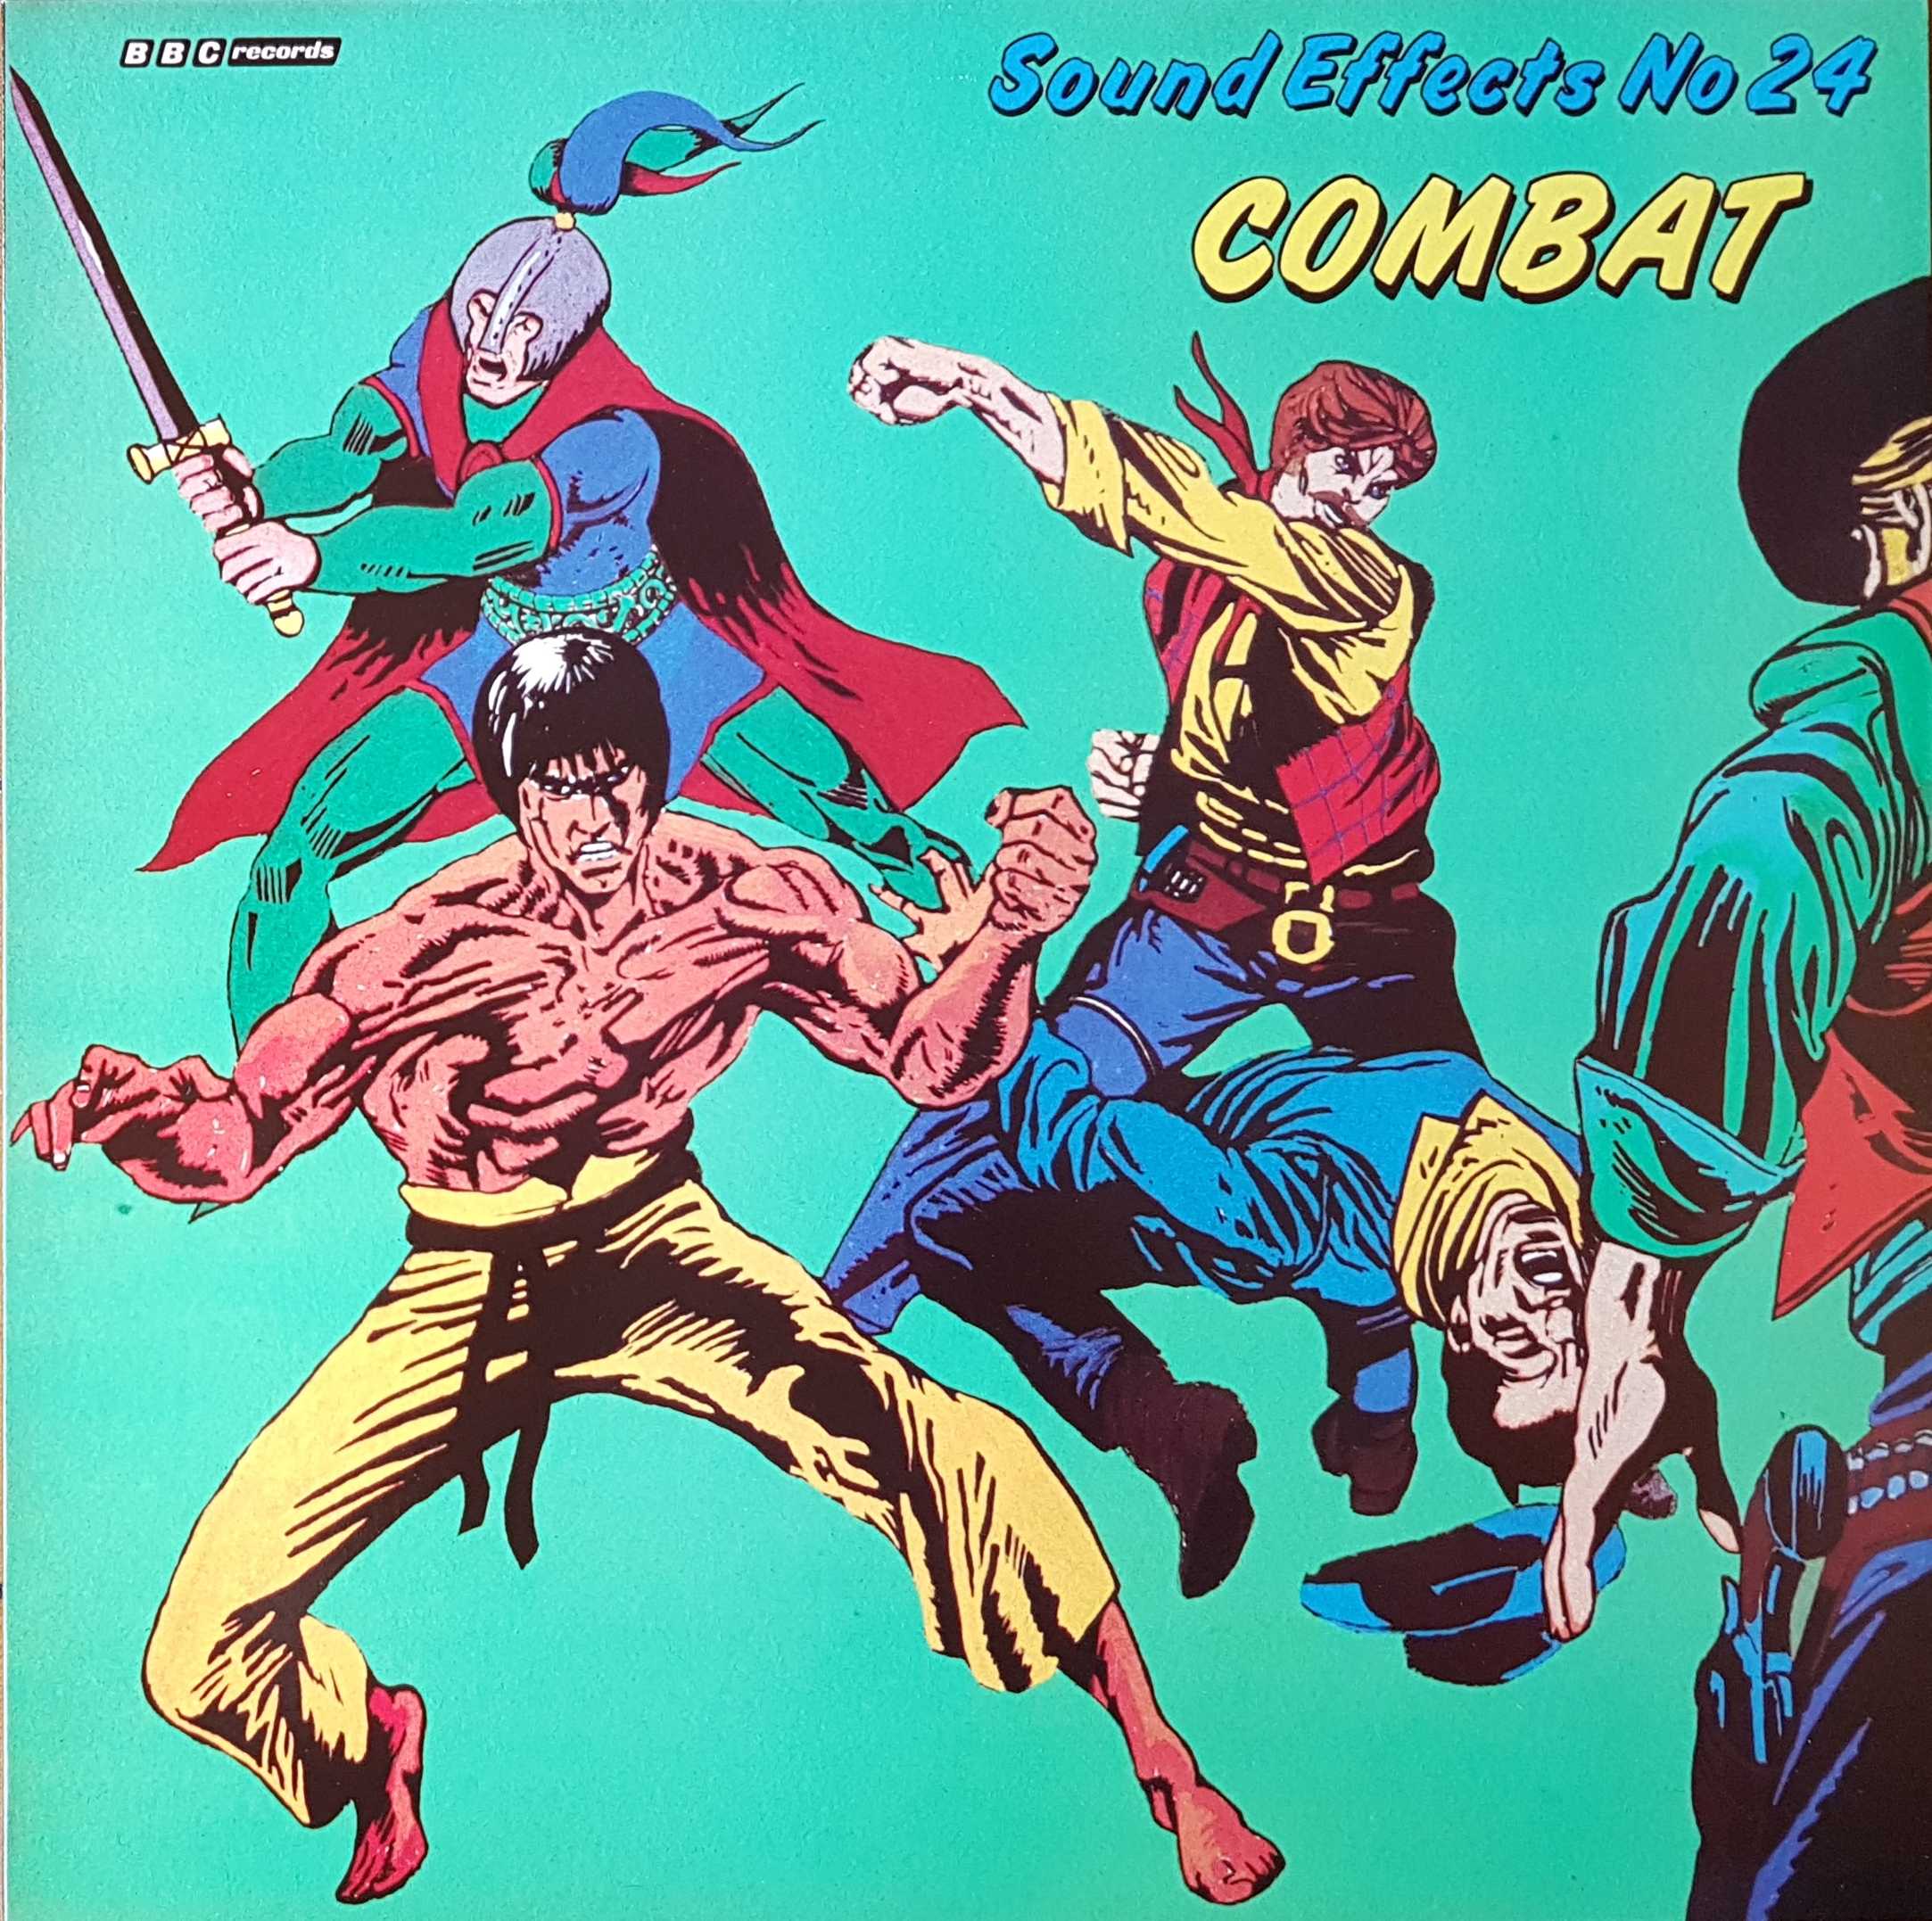 Picture of REC 383 Combat sound effects (No. 24) by artist Various from the BBC albums - Records and Tapes library